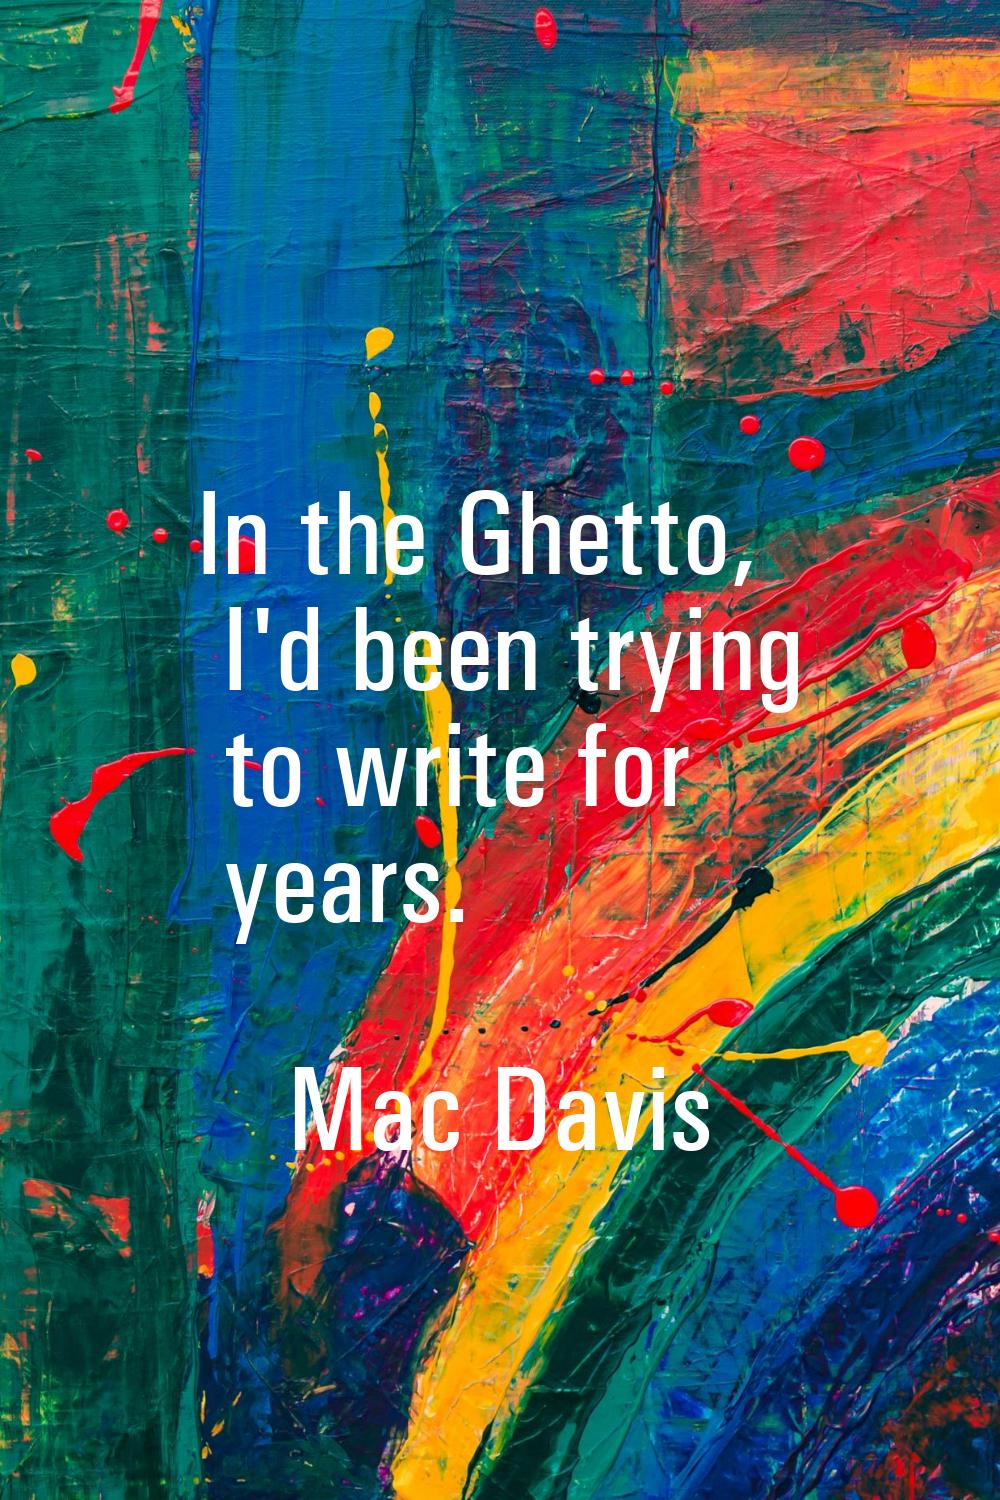 In the Ghetto, I'd been trying to write for years.